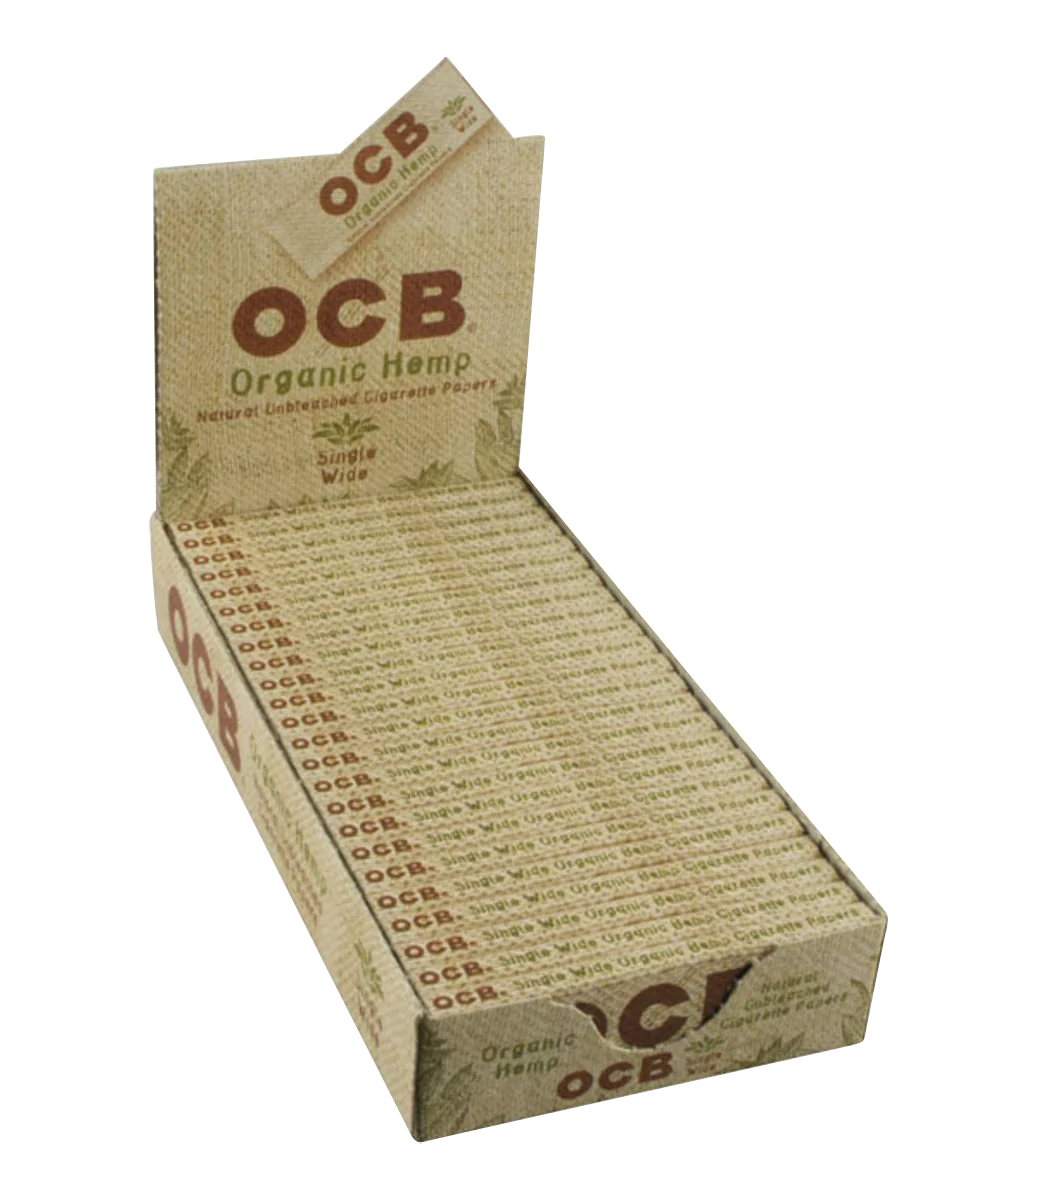 OCB Organic Hemp Rolling Papers Single Wide pack displayed at an angle on a white background